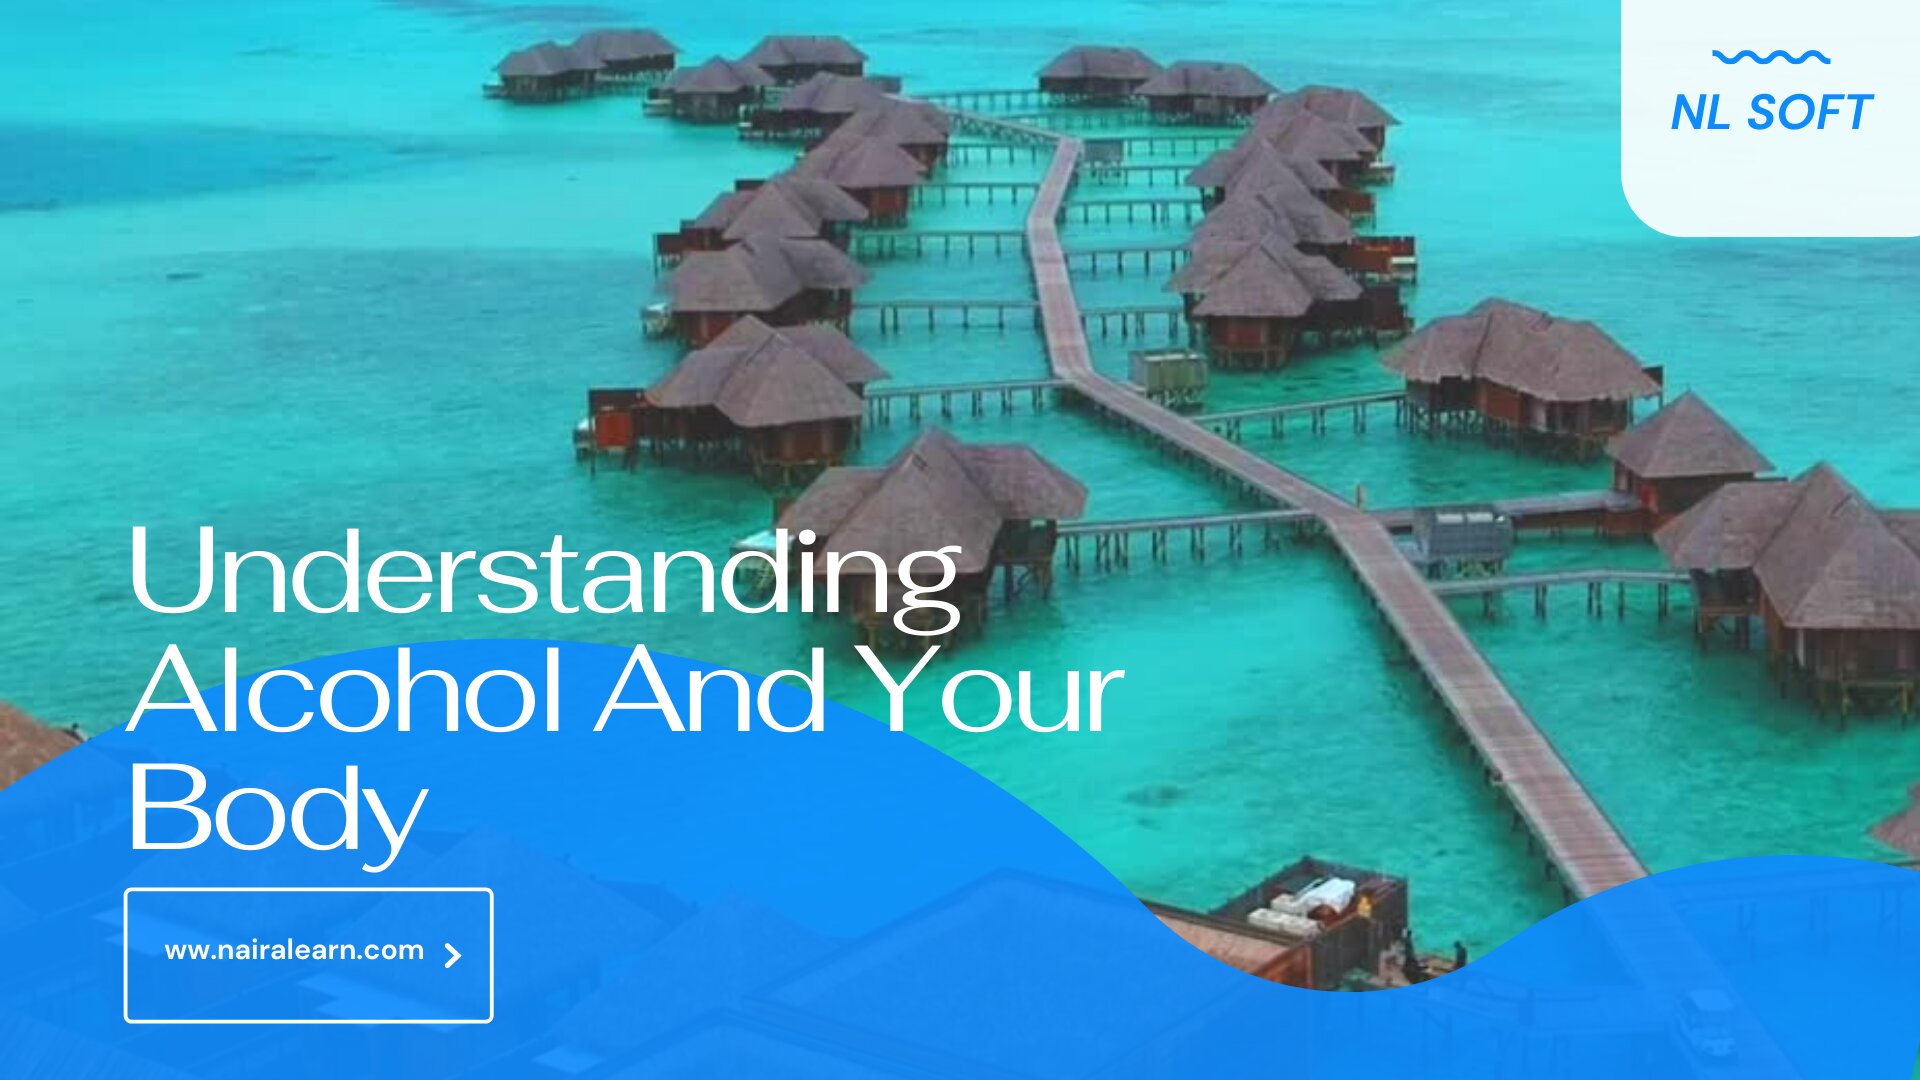 Understanding Alcohol And Your Body